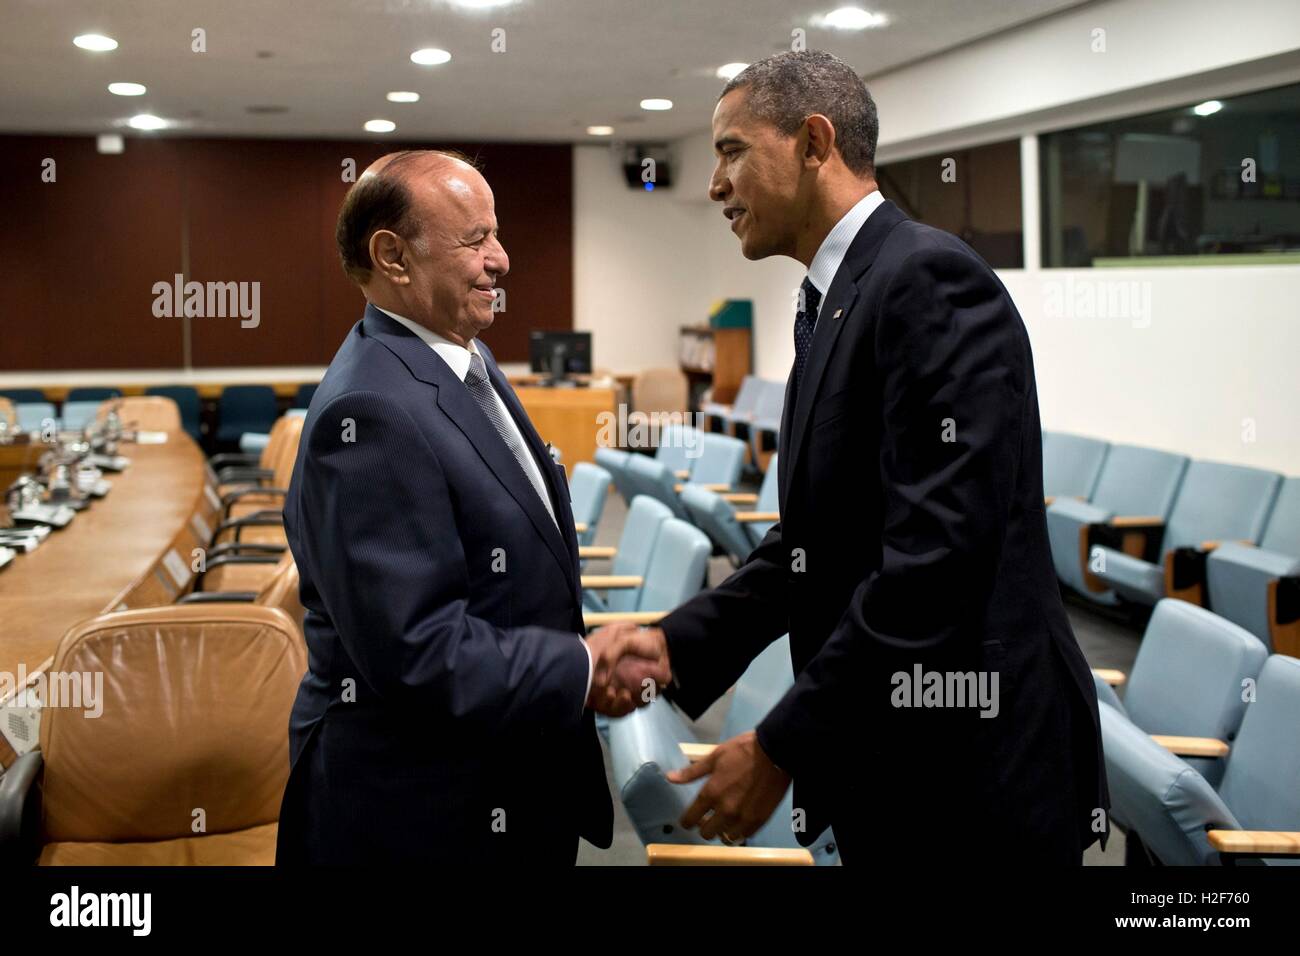 U.S. President Barack Obama meets with Yemeni President Abd Rabbuh Mansur Hadi in the Security Council Consultation Room at the United Nations September 25, 2012 in New York, New York. Stock Photo